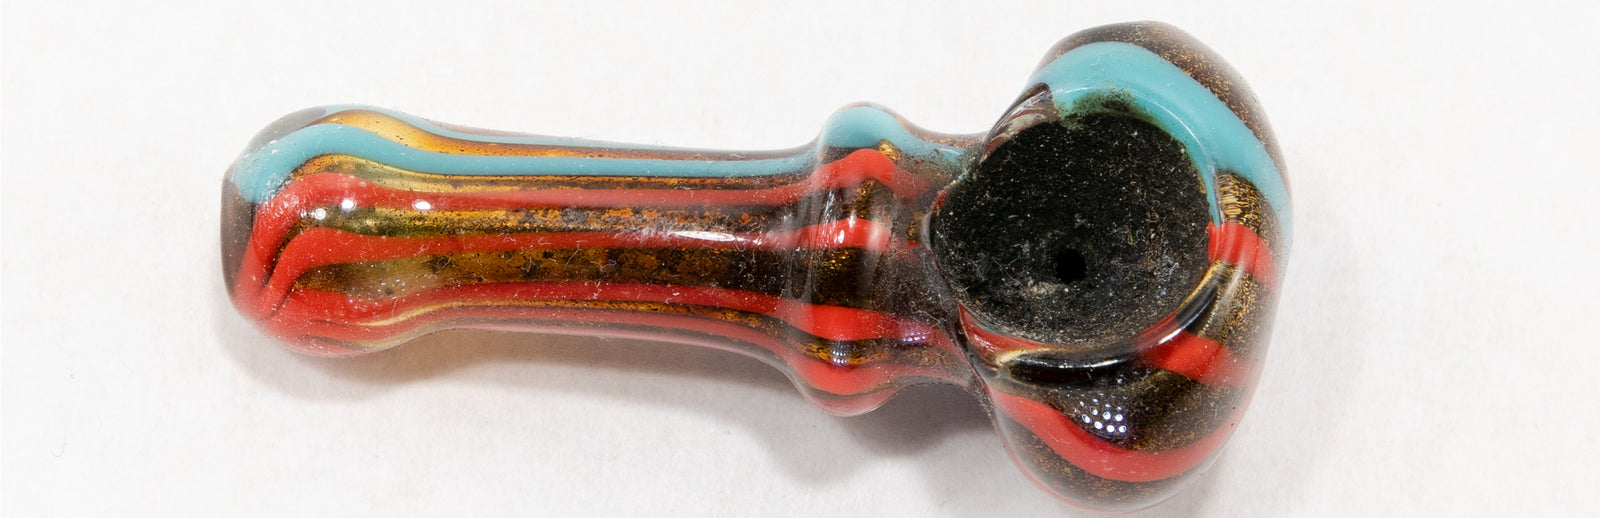 10 Ways to Ruin Your Tobacco Pipes 